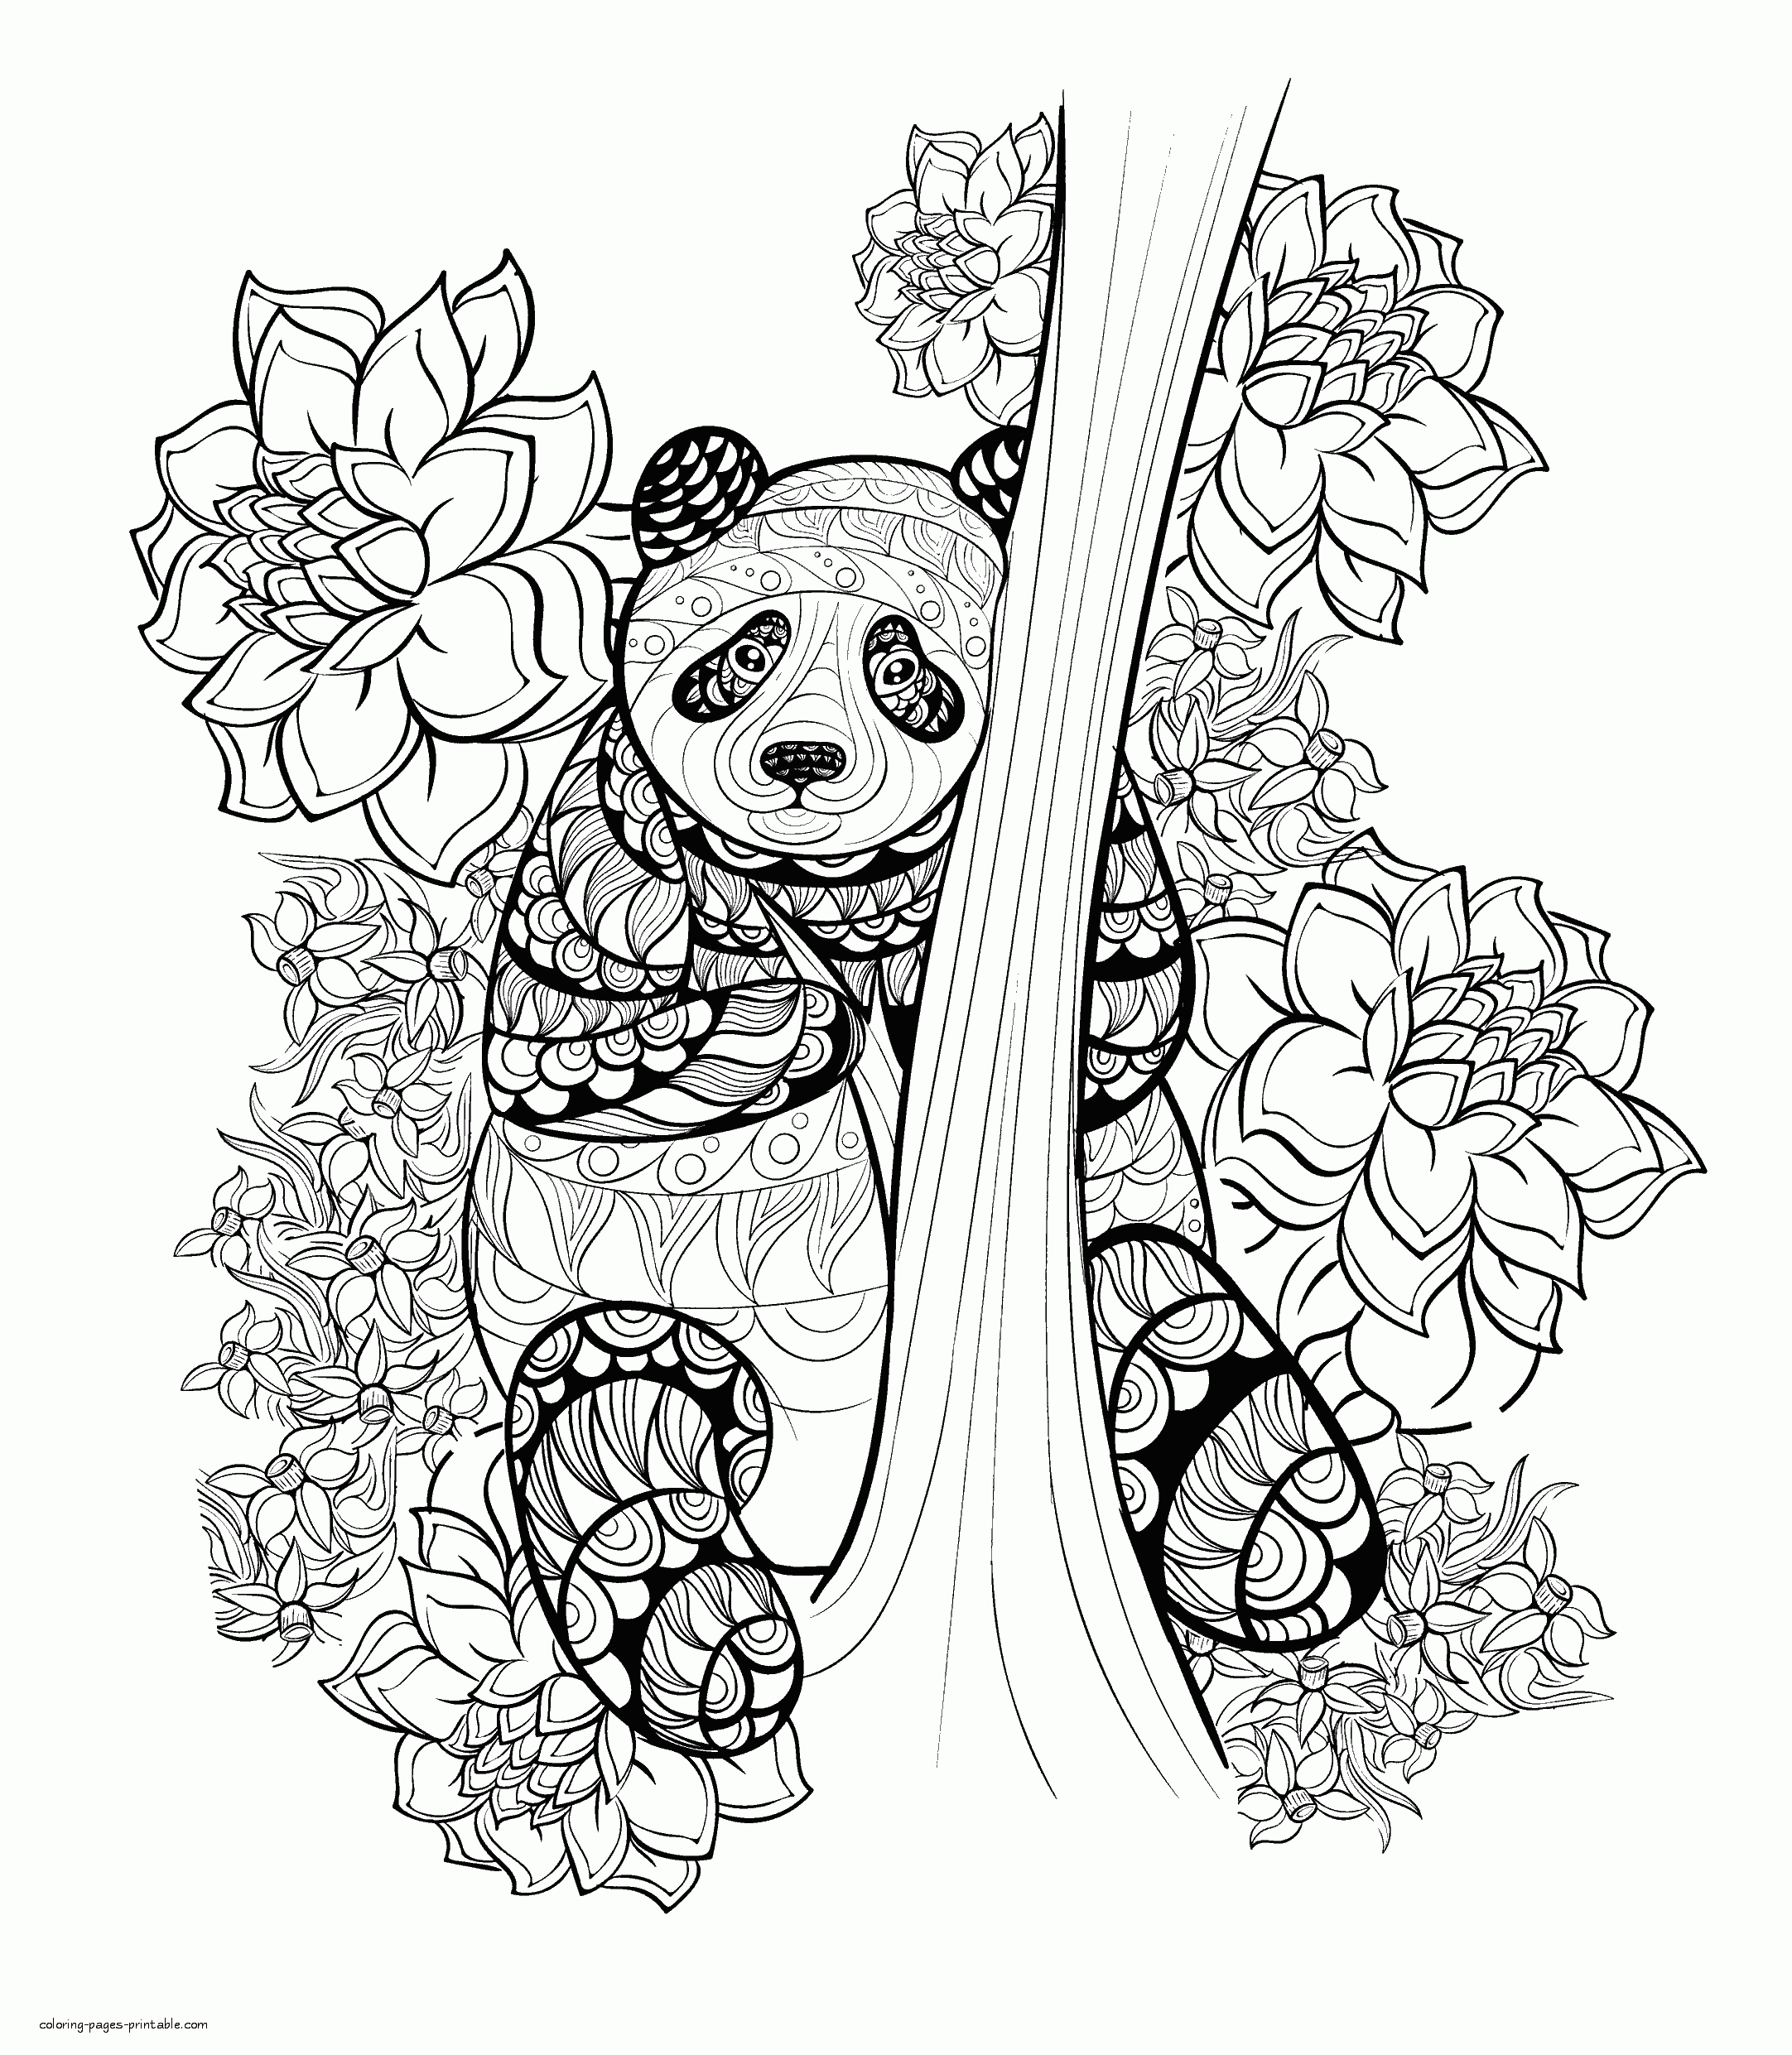 Panda Coloring Page For Adults